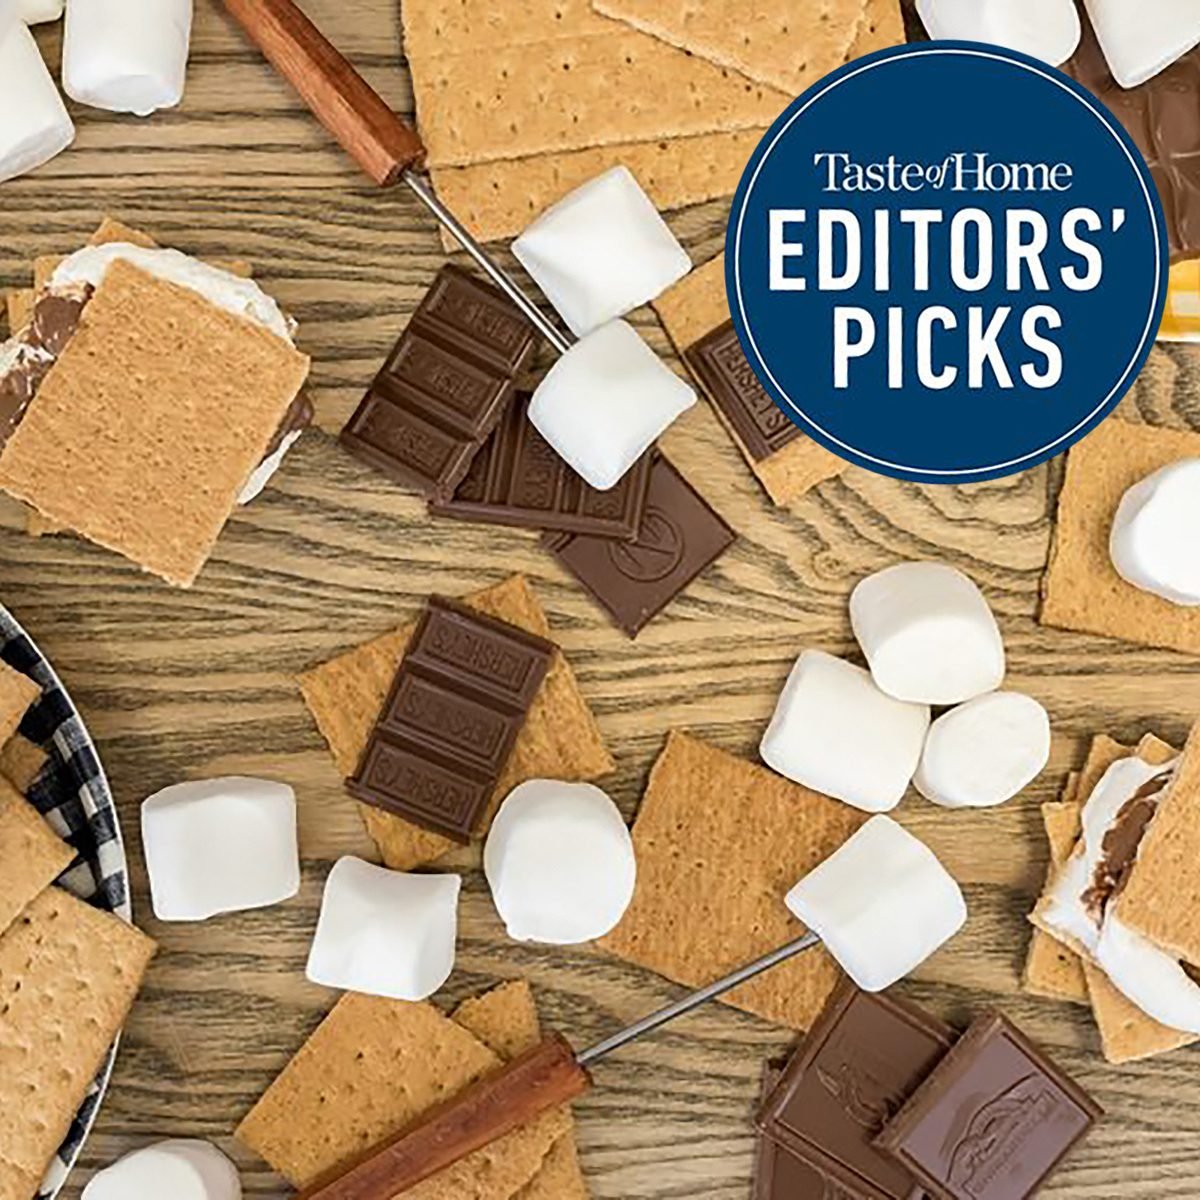 Campfire S'mores Are Great. Kitchen S'mores Are Even Better.